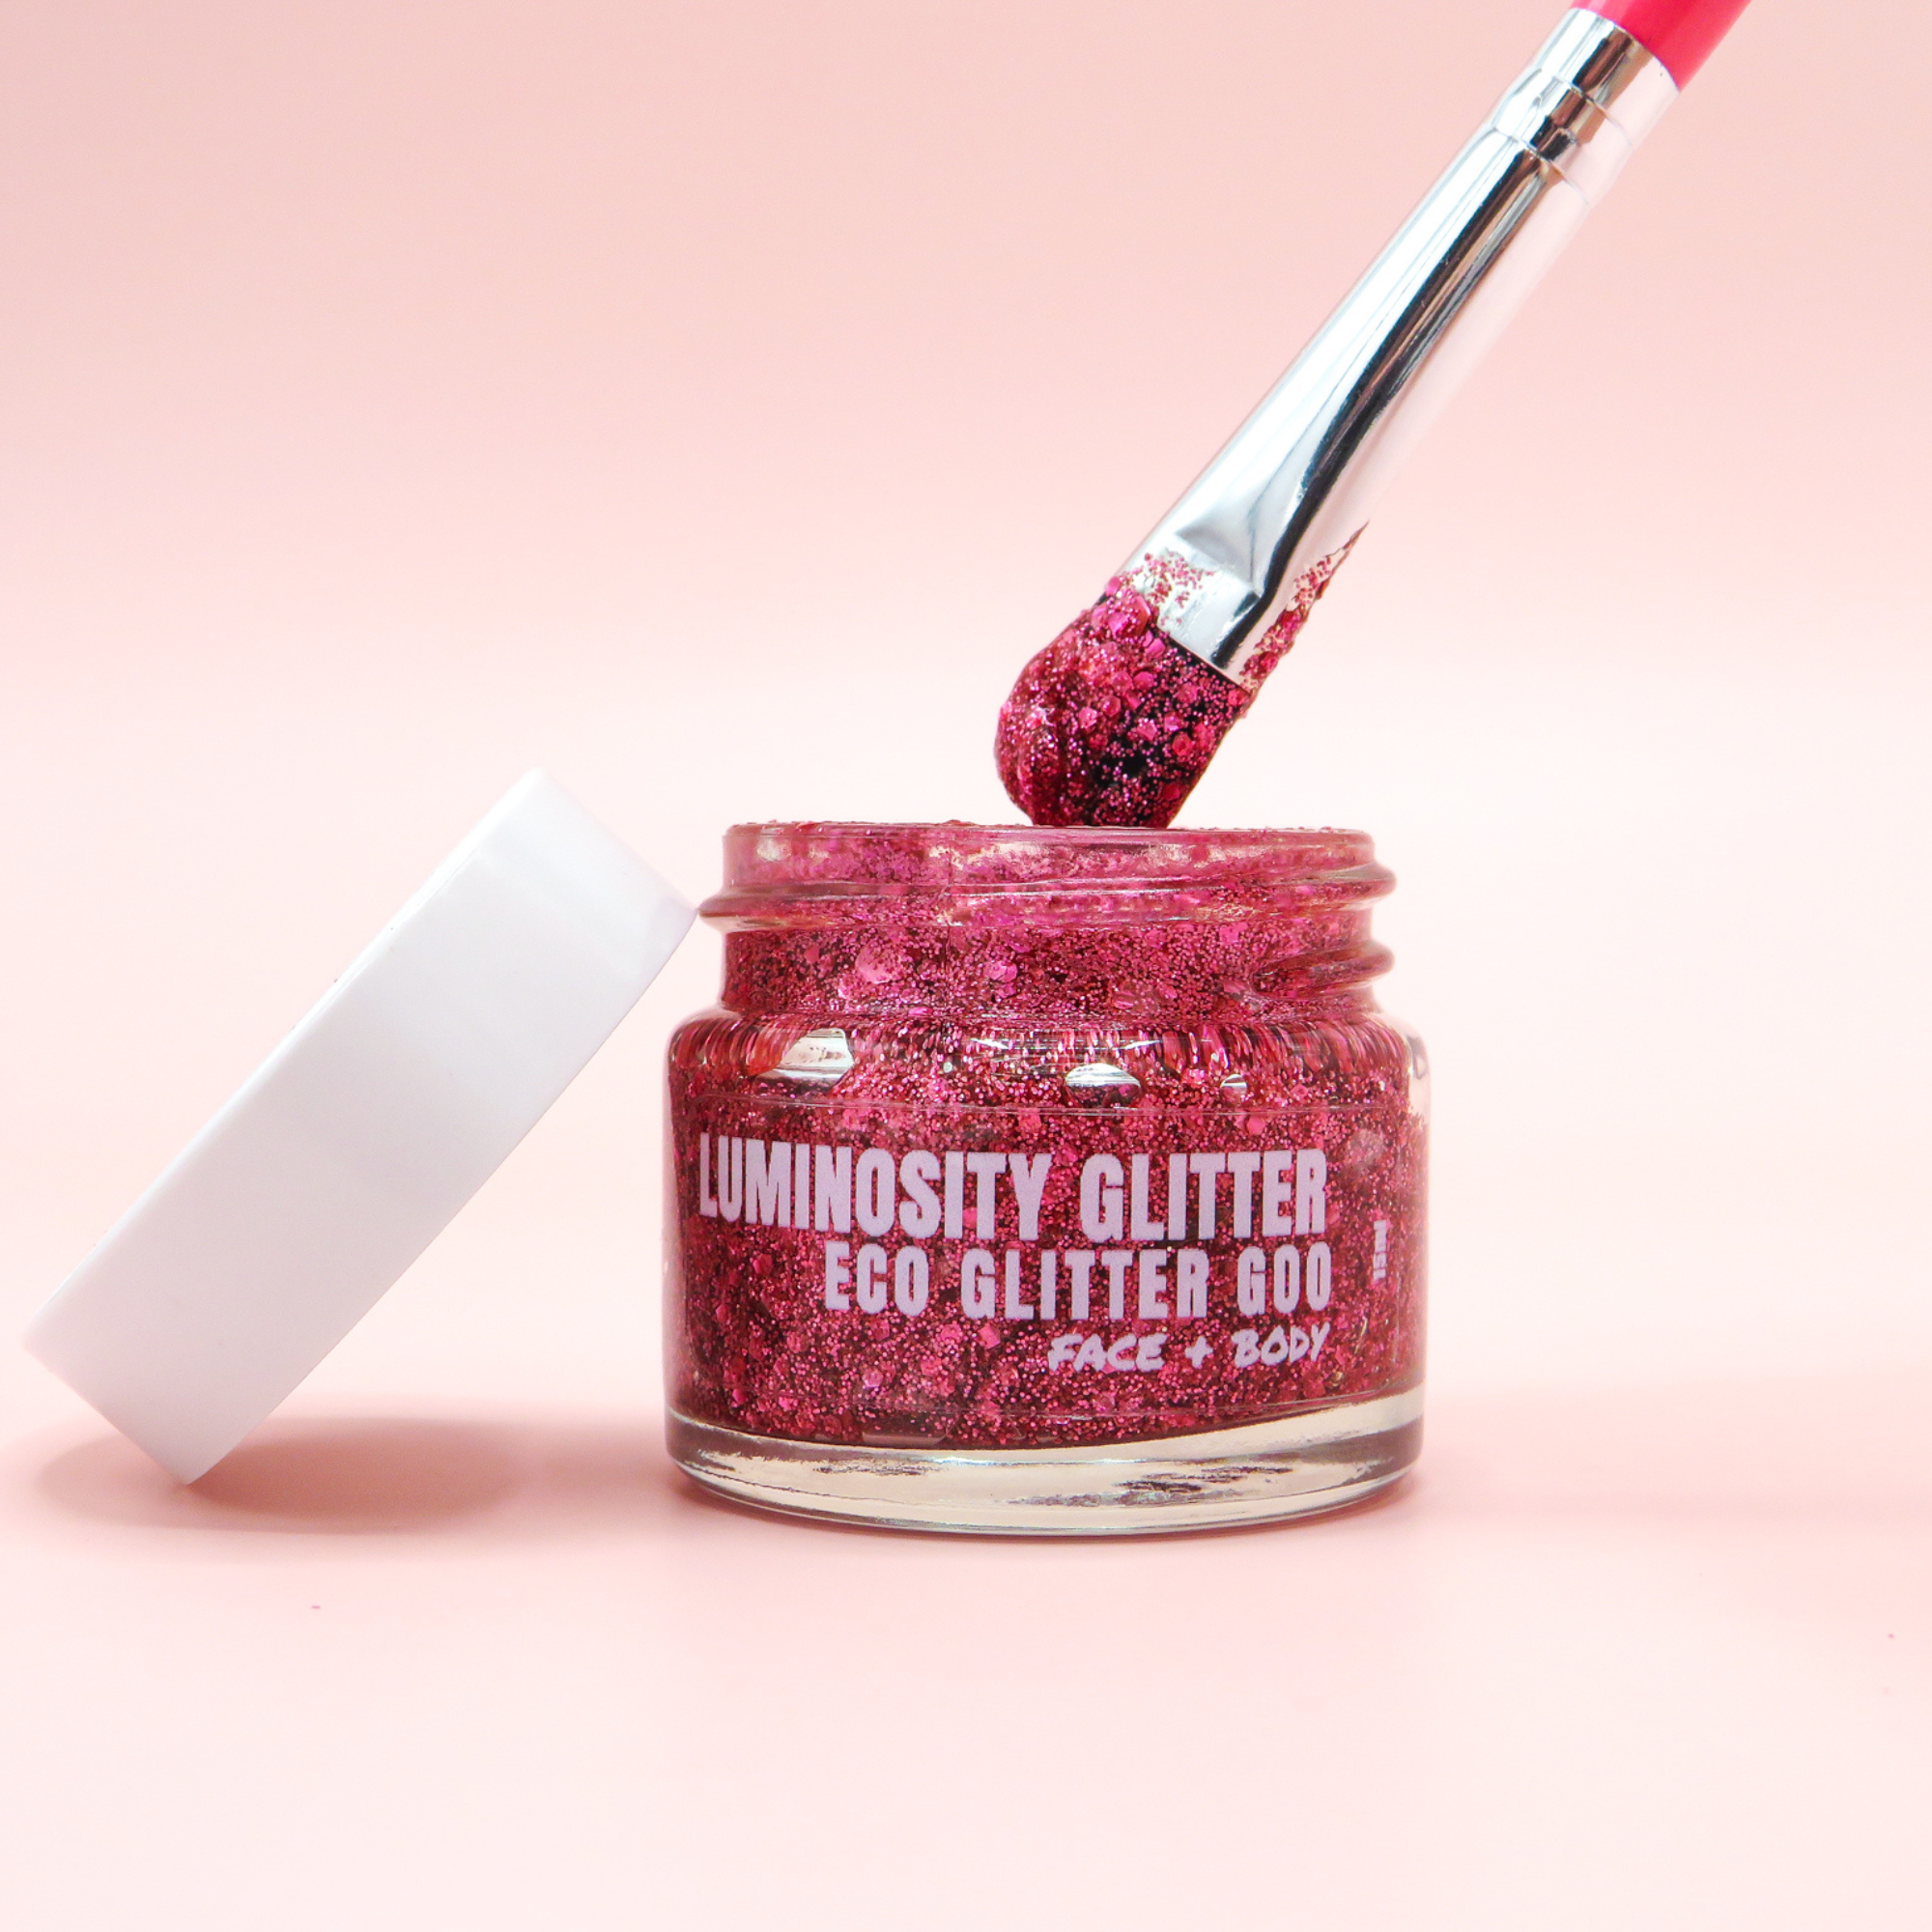 Pink eco glitter gel for your face and body made by Luminosity Glitter